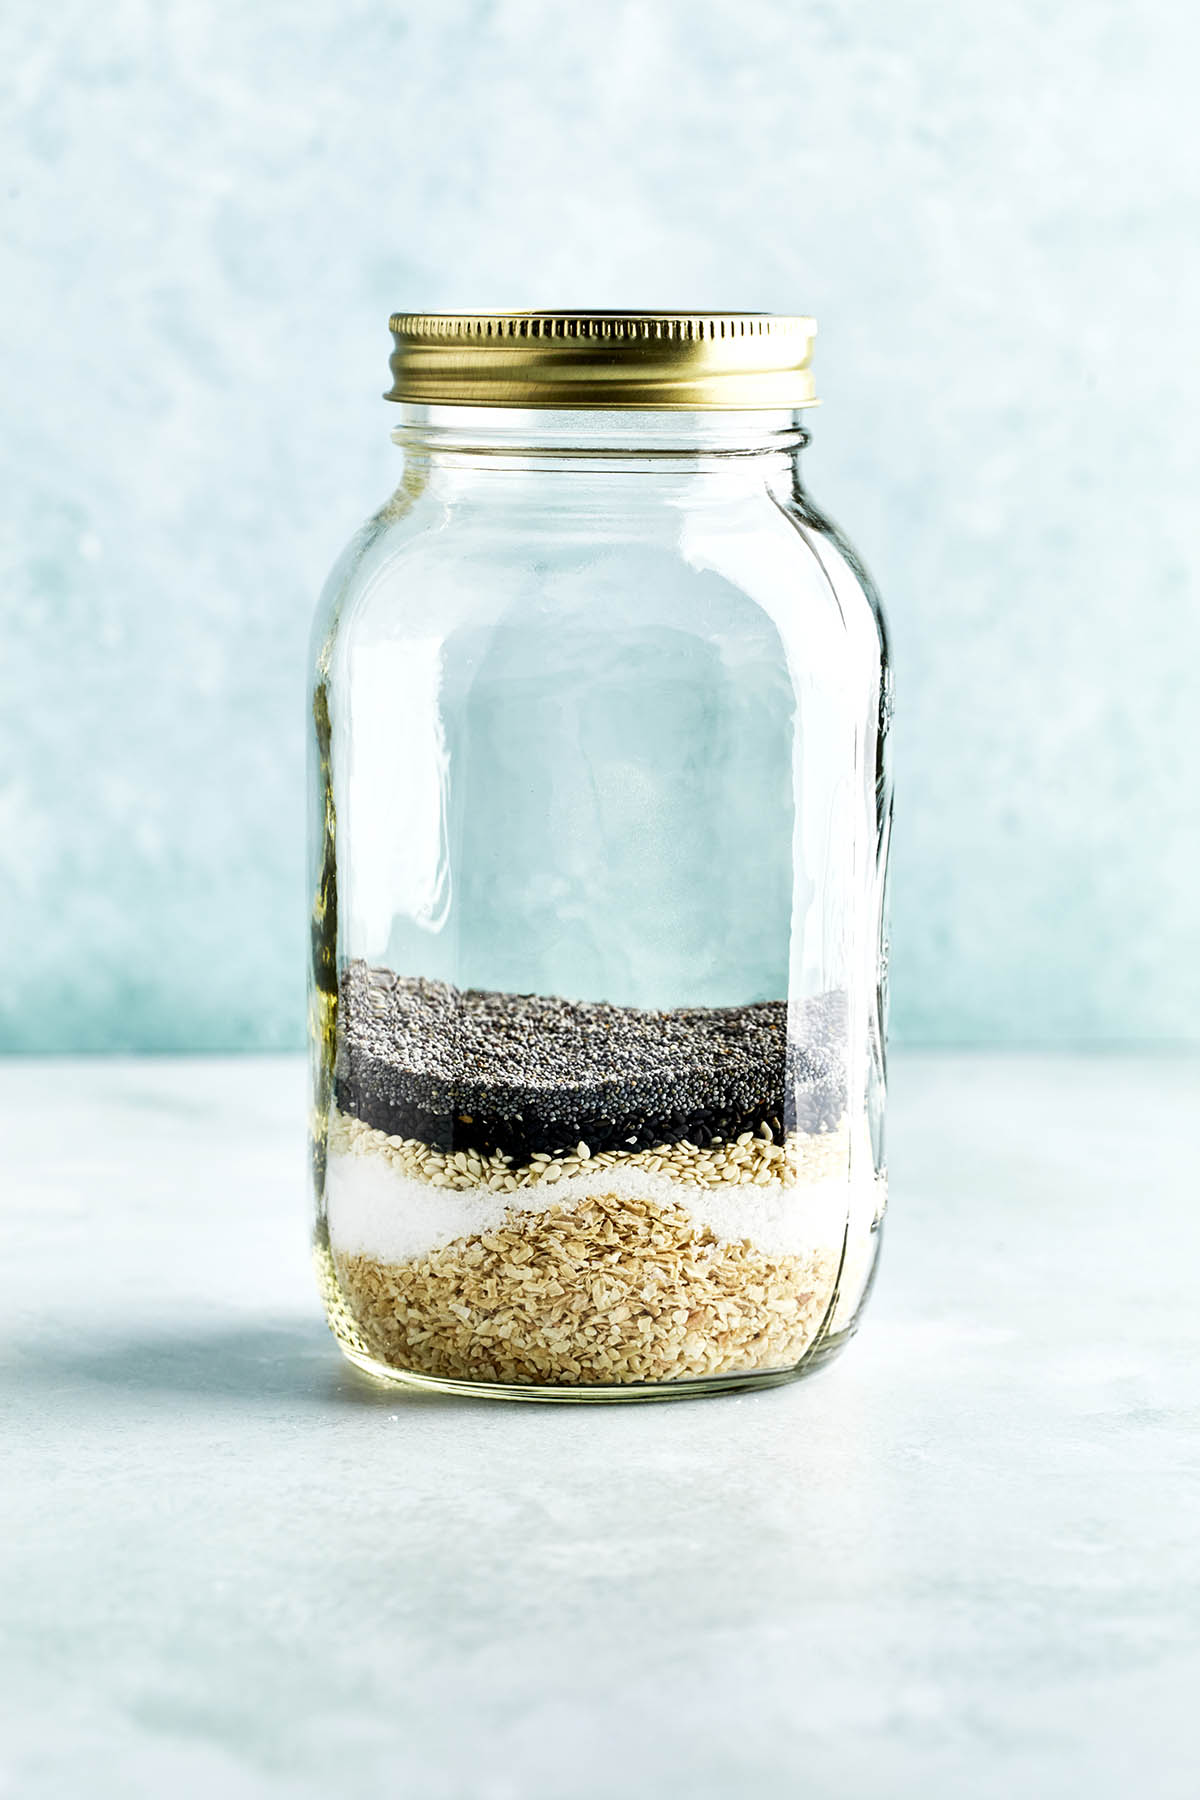 Unmixed everything bagel seasoning in a glass jar.